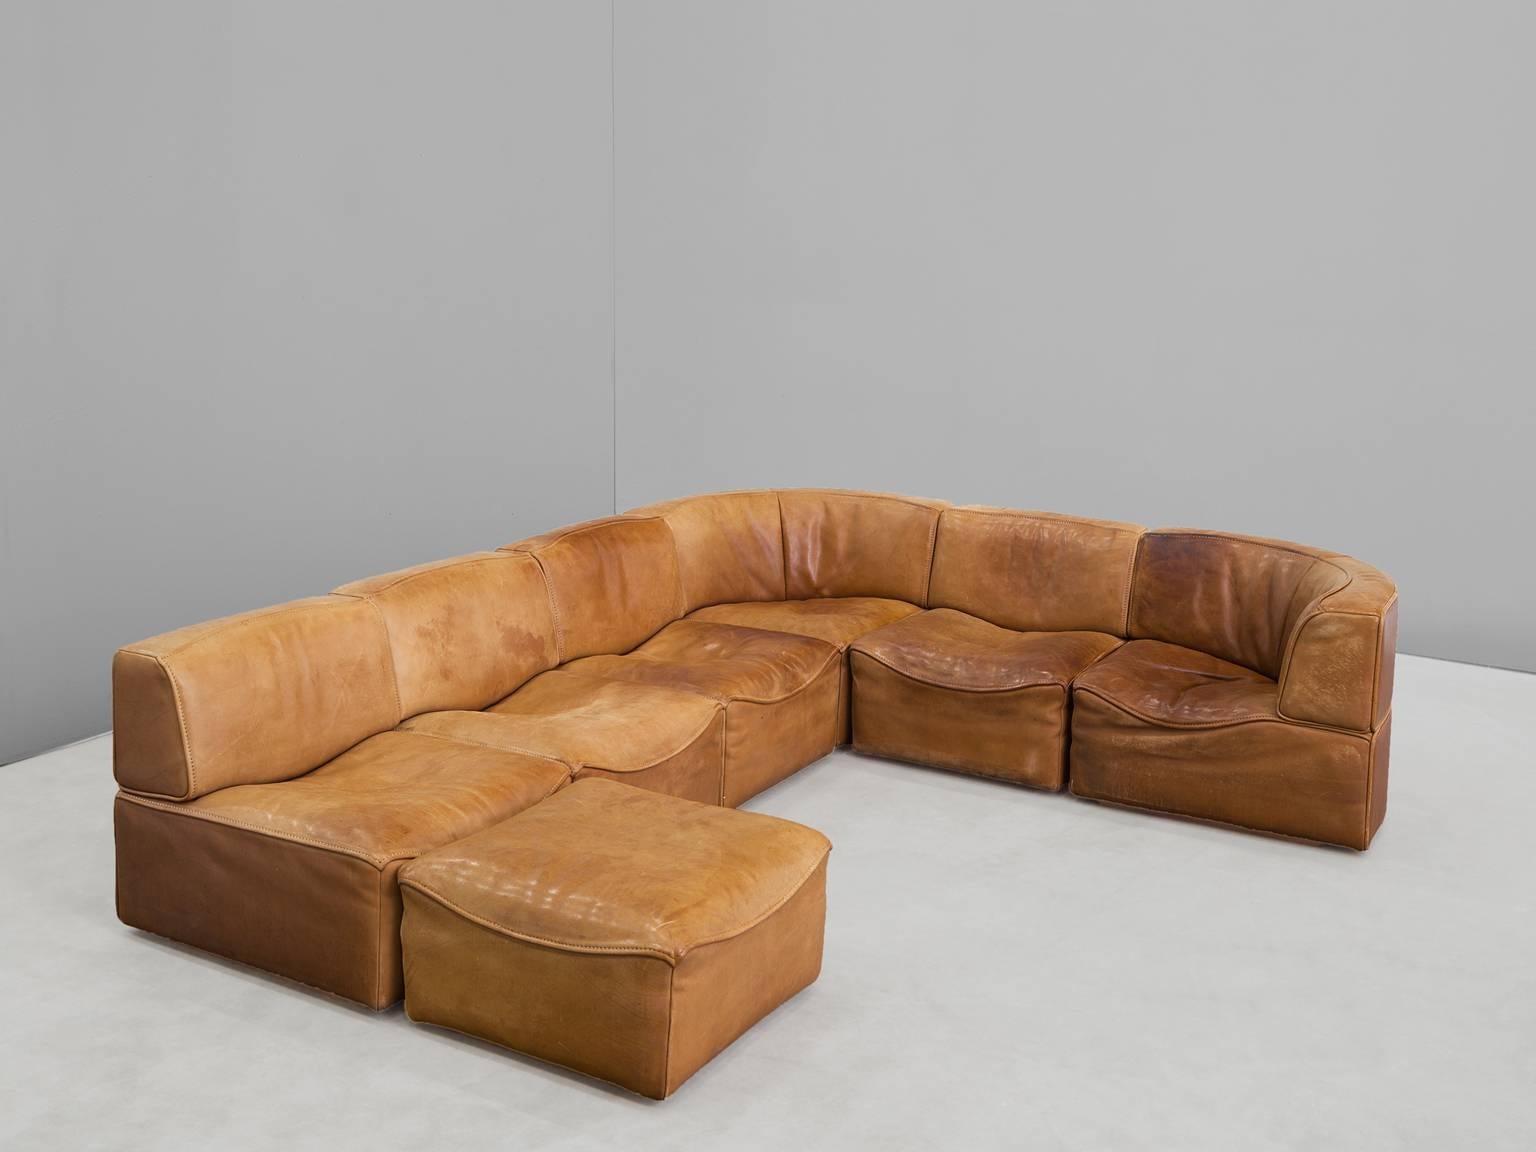 Sectional sofa model DS-15, in cognac leather by De Sede, Switzerland, 1970s. 

This sectional sofa contains two corner elements, four normal elements and an ottoman making this a seven elements sofa. The section makes it possible to arrange this